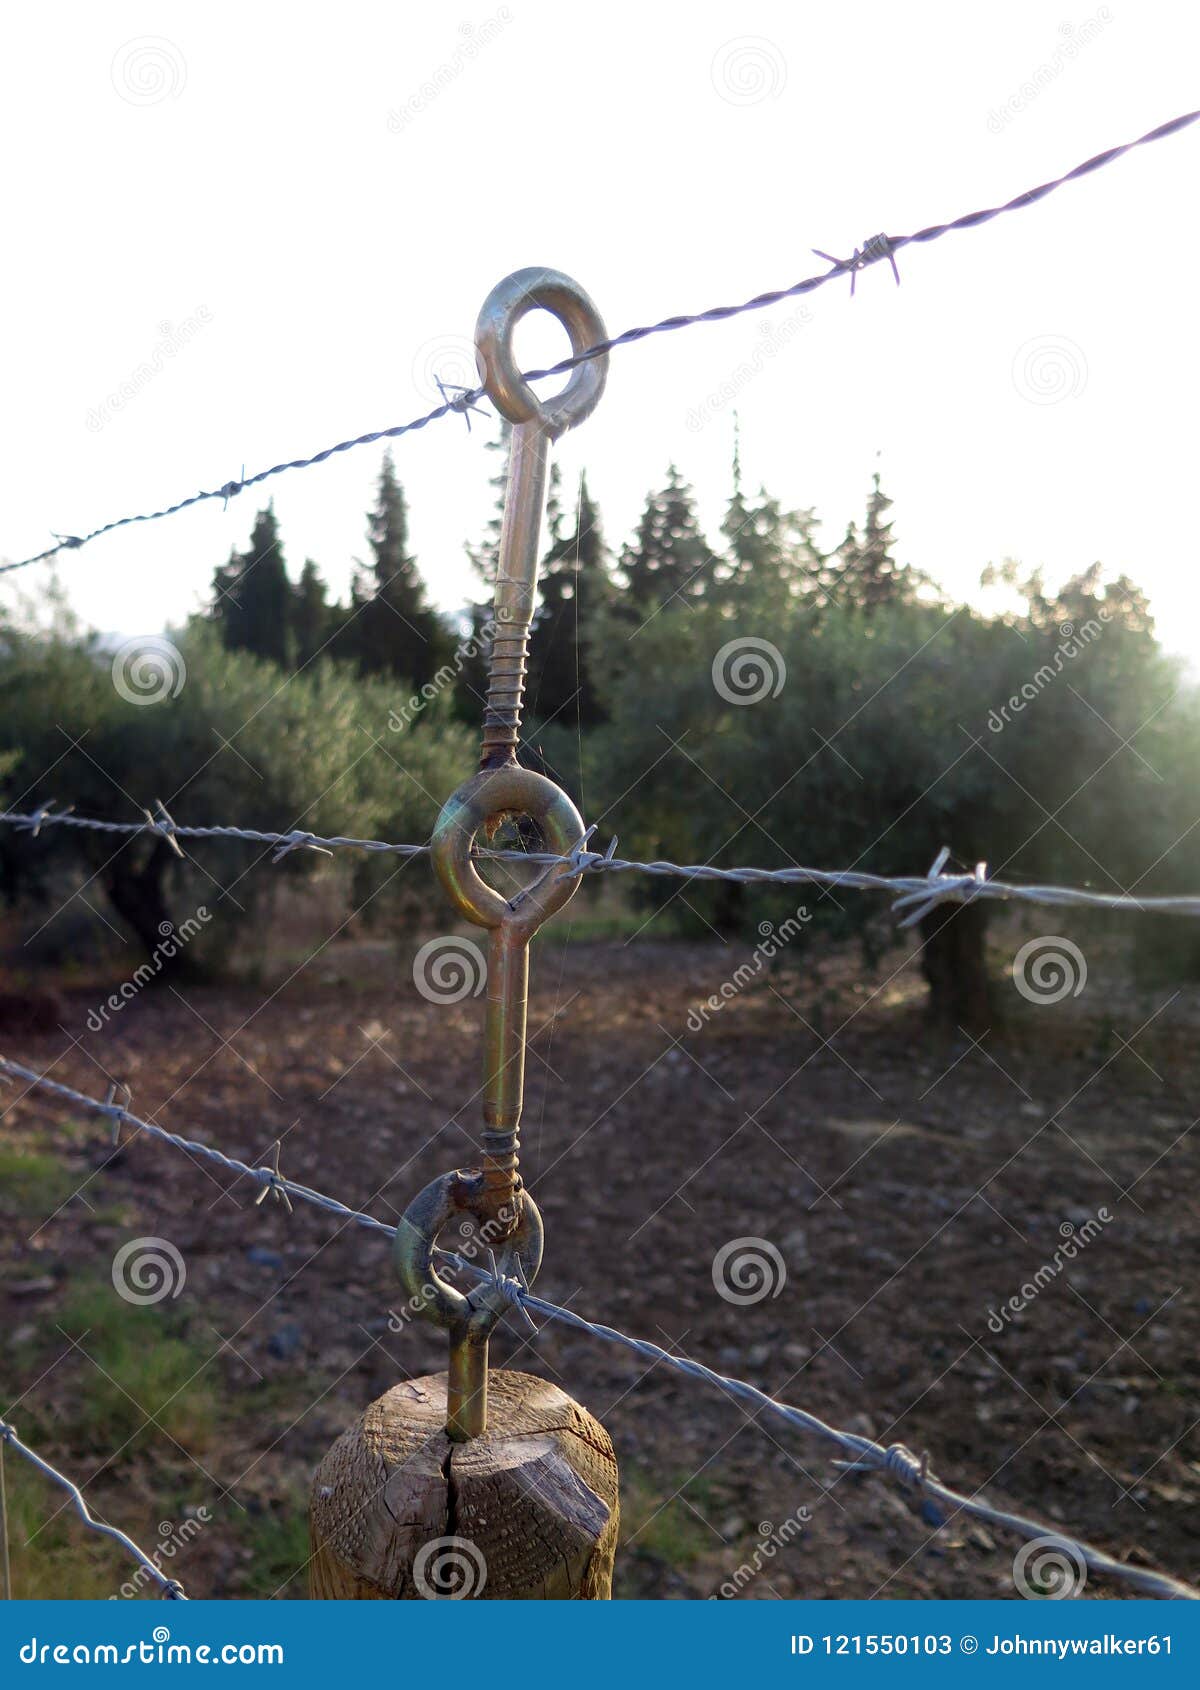 Three Tier Eyebolt Barbed Wire Support Stock Image - Image of